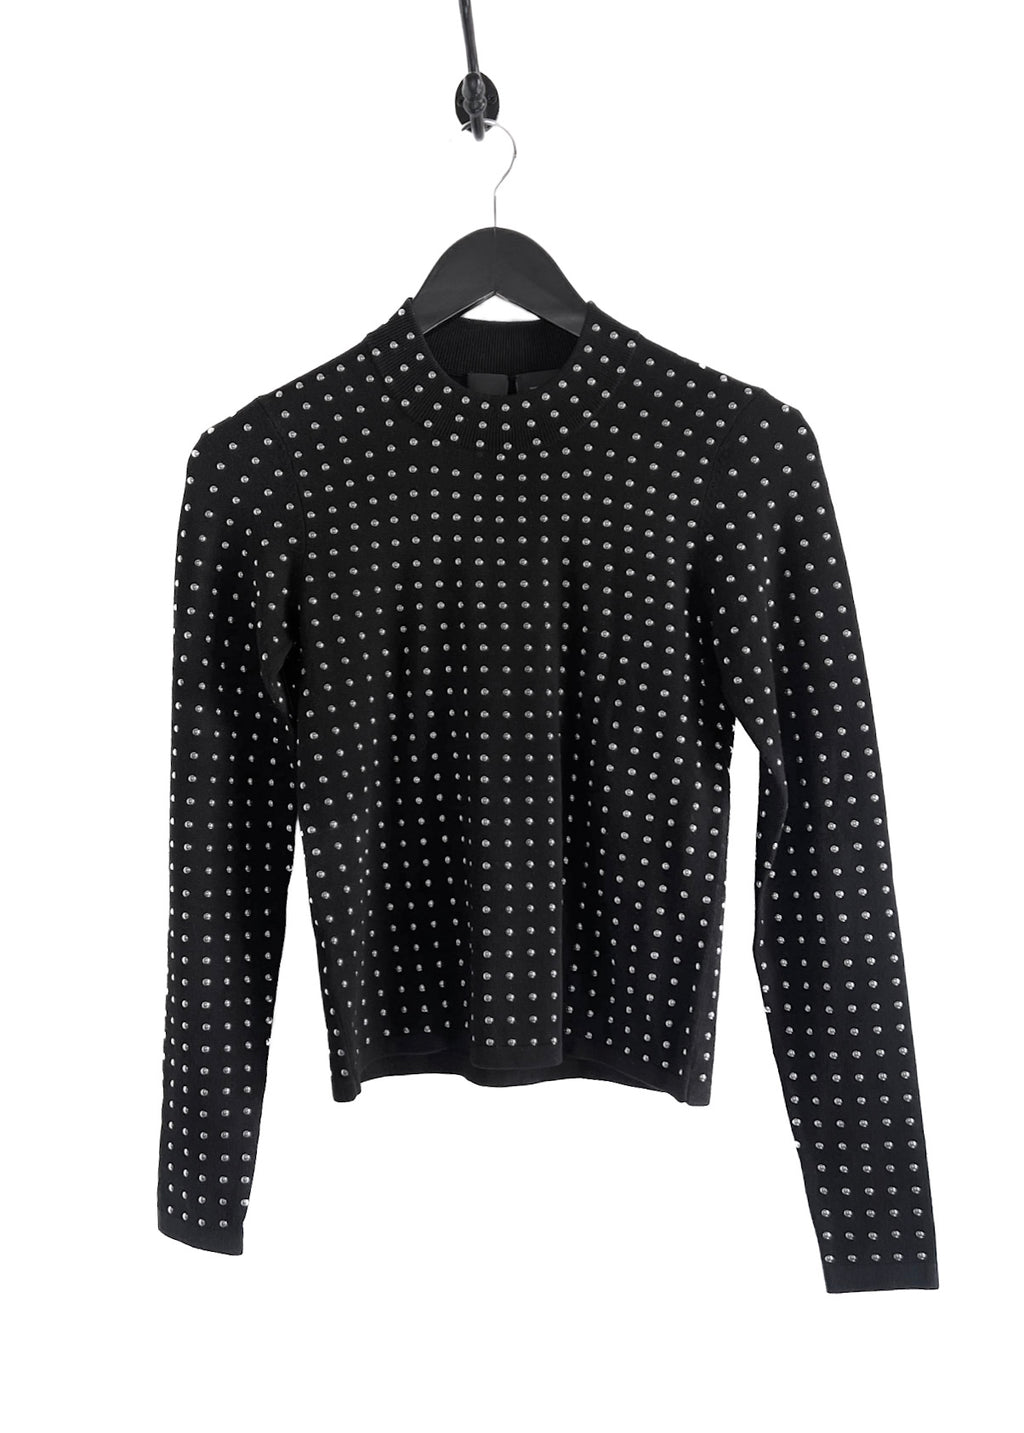 Pinko Black All Over Studded Euforios Sweater